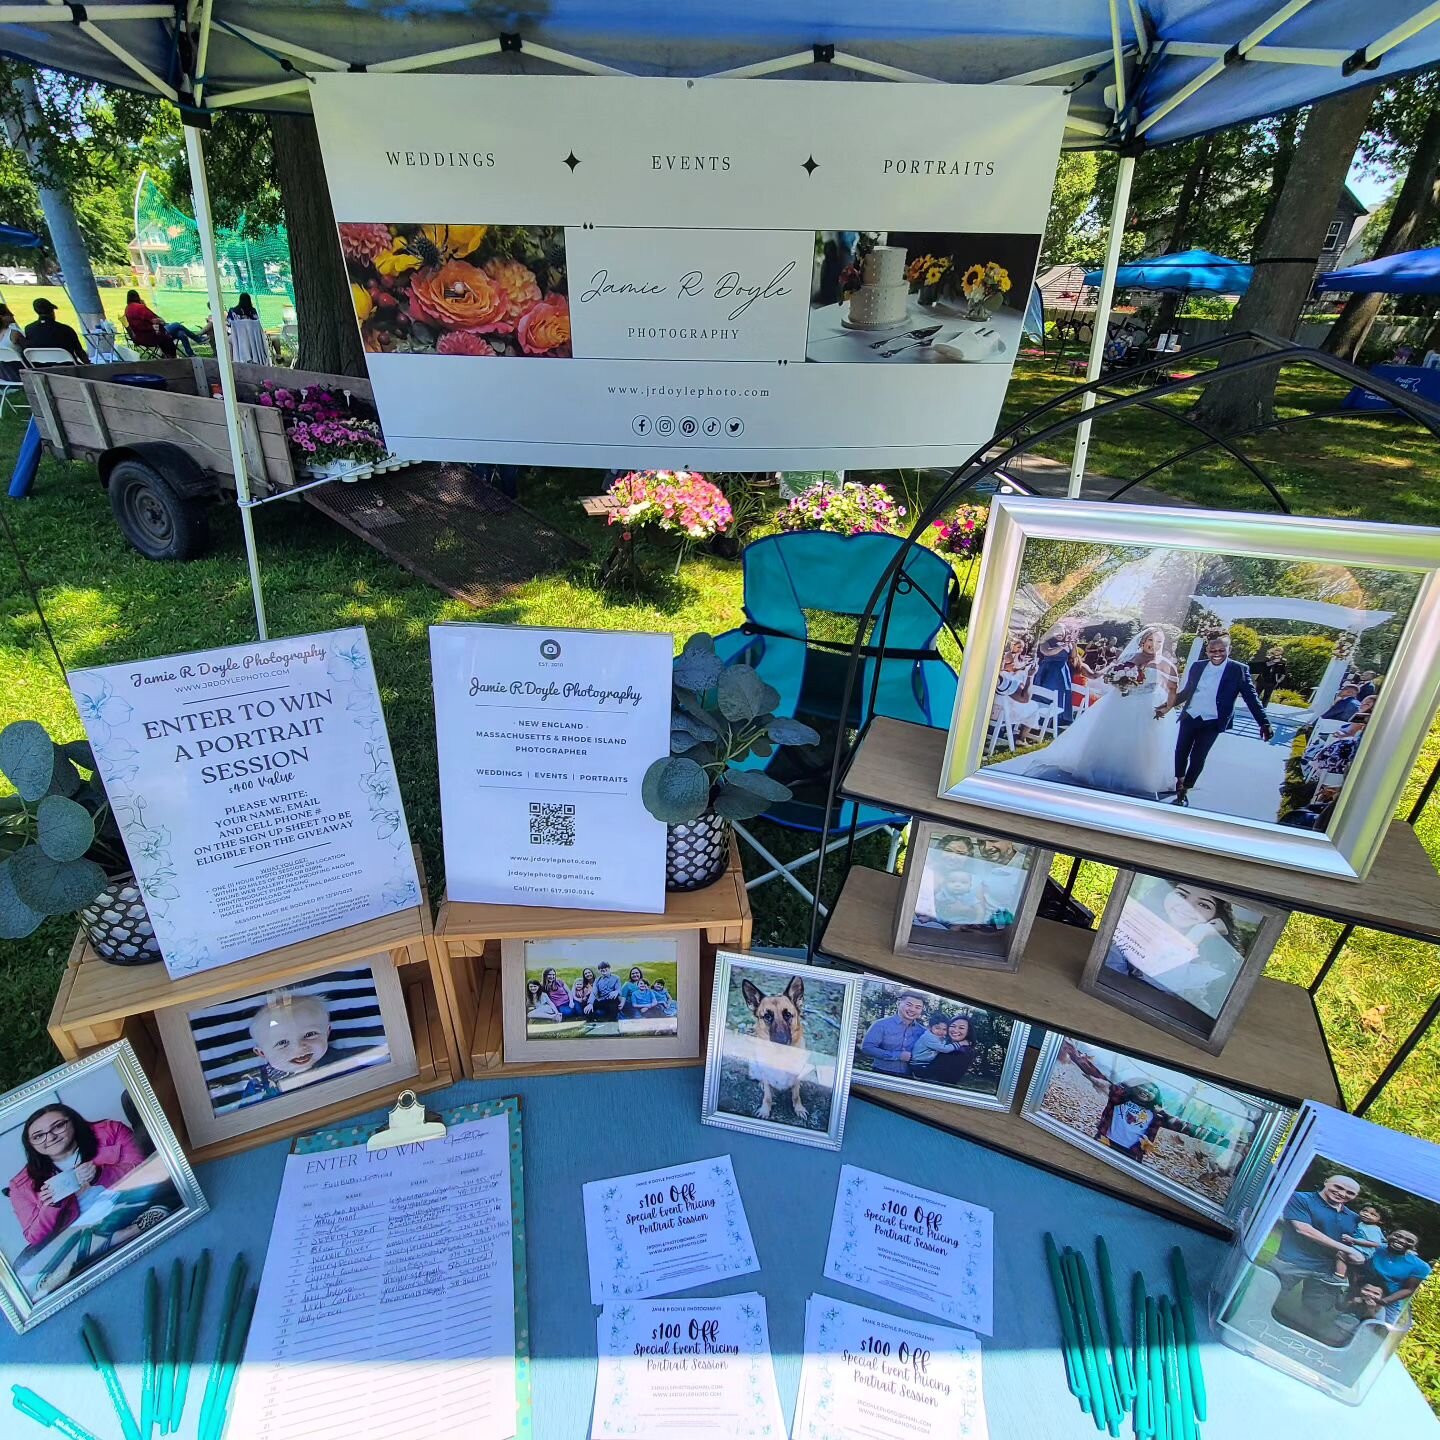 Do you spy your photo? If so, drop a comment below. 

I'm pretty proud of my little setup that I had going yesterday, even though I was not at my tent much and left it for people to check out themselves. To me, it was an esthetically pleasing table/s